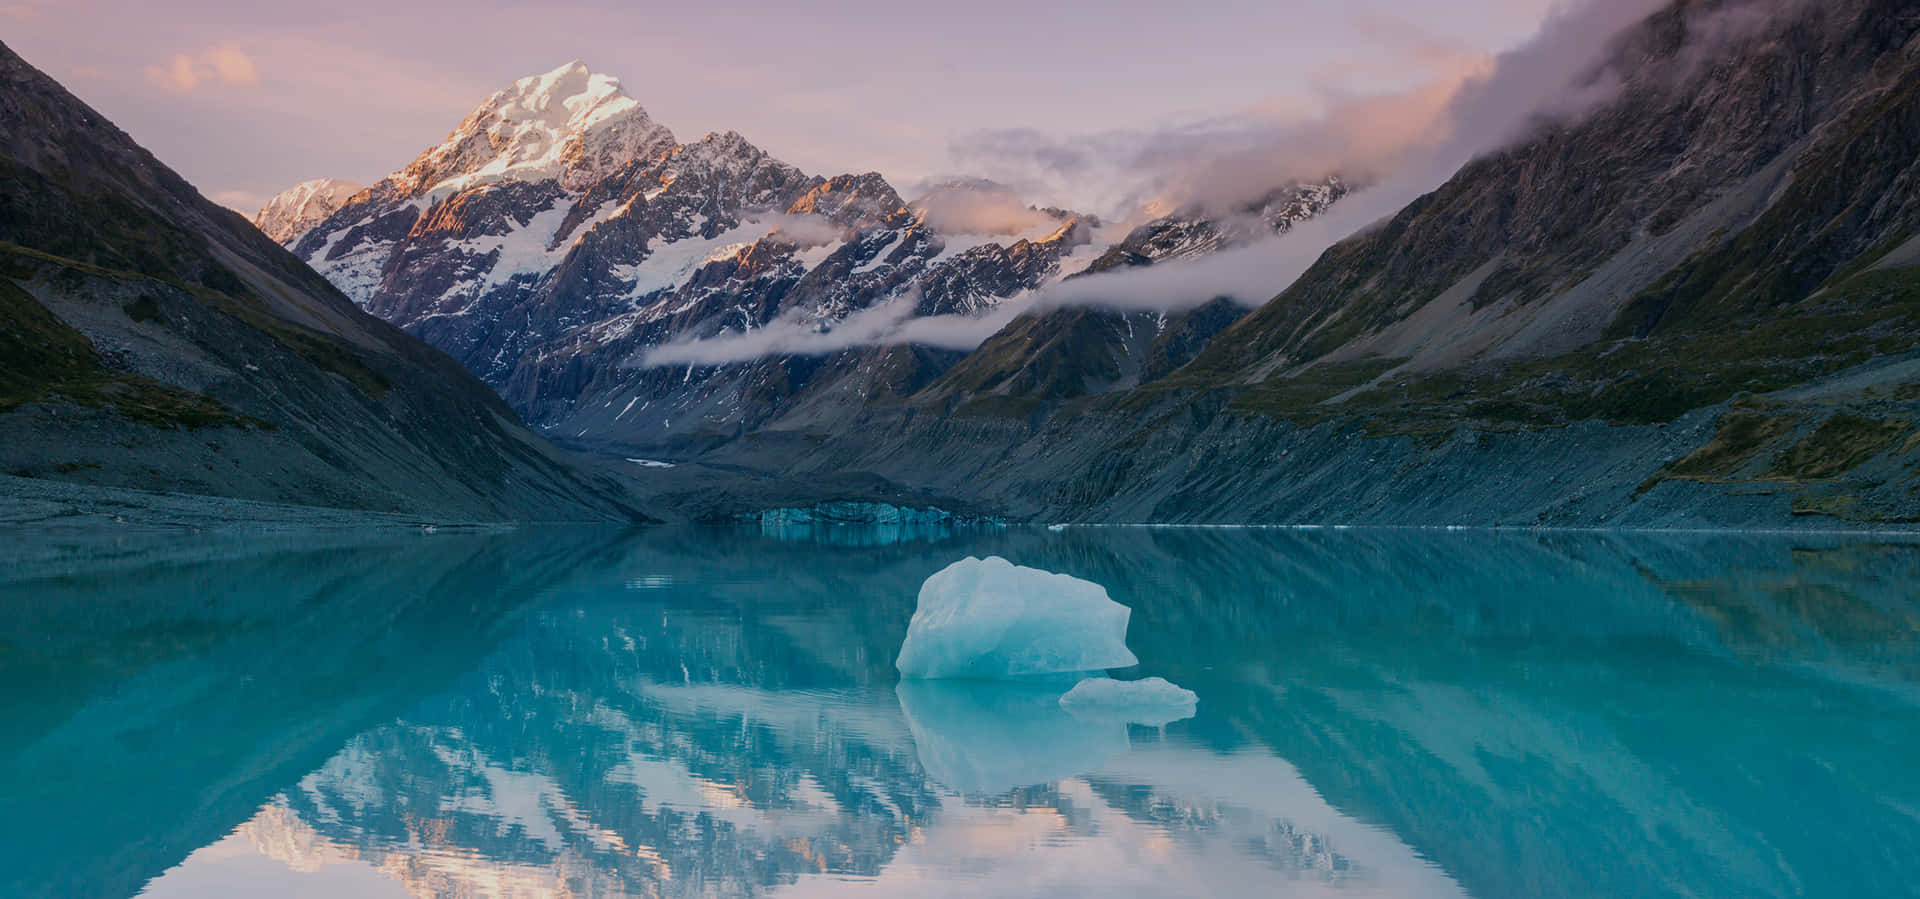 Experience New Zealand's Sparkling Landscapes